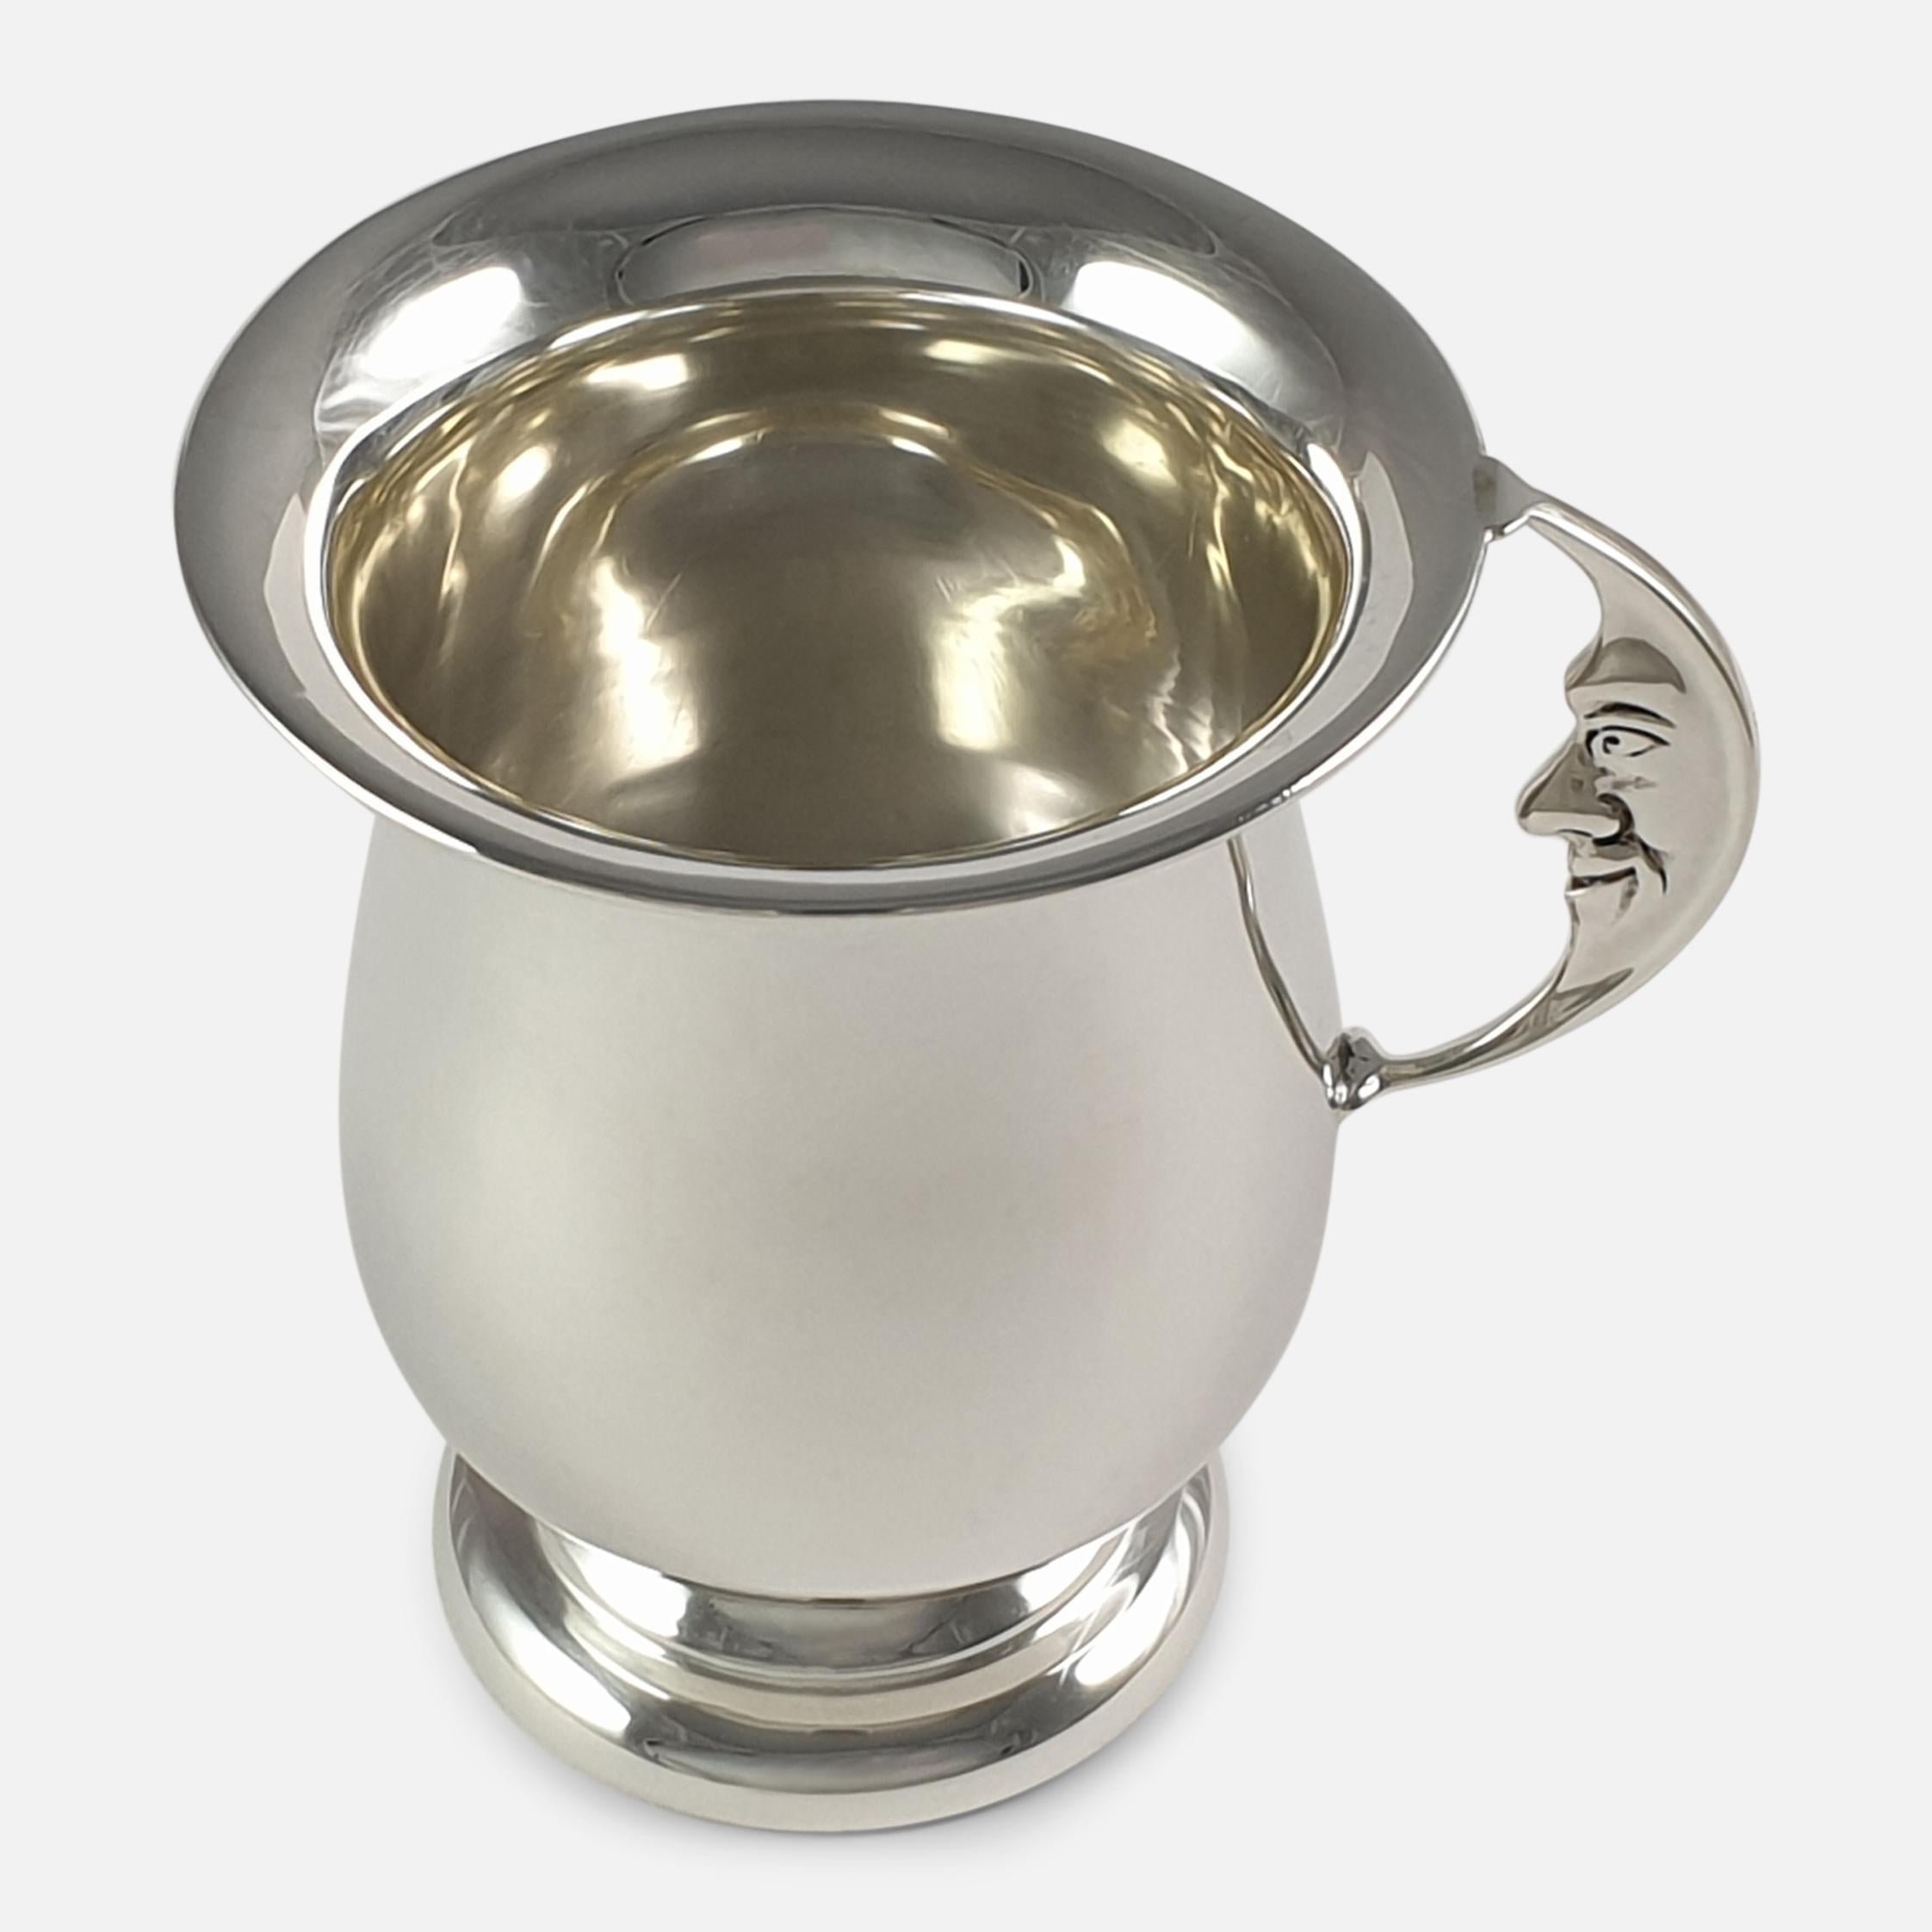 A George V sterling silver 'Man In The Moon' christening cup, by Horton & Allday, Birmingham, 1929. The silver cup is of plain baluster form, sitting on a circular pedestal foot. The handle is crafted in the shape of a crescent moon with a 'Man in